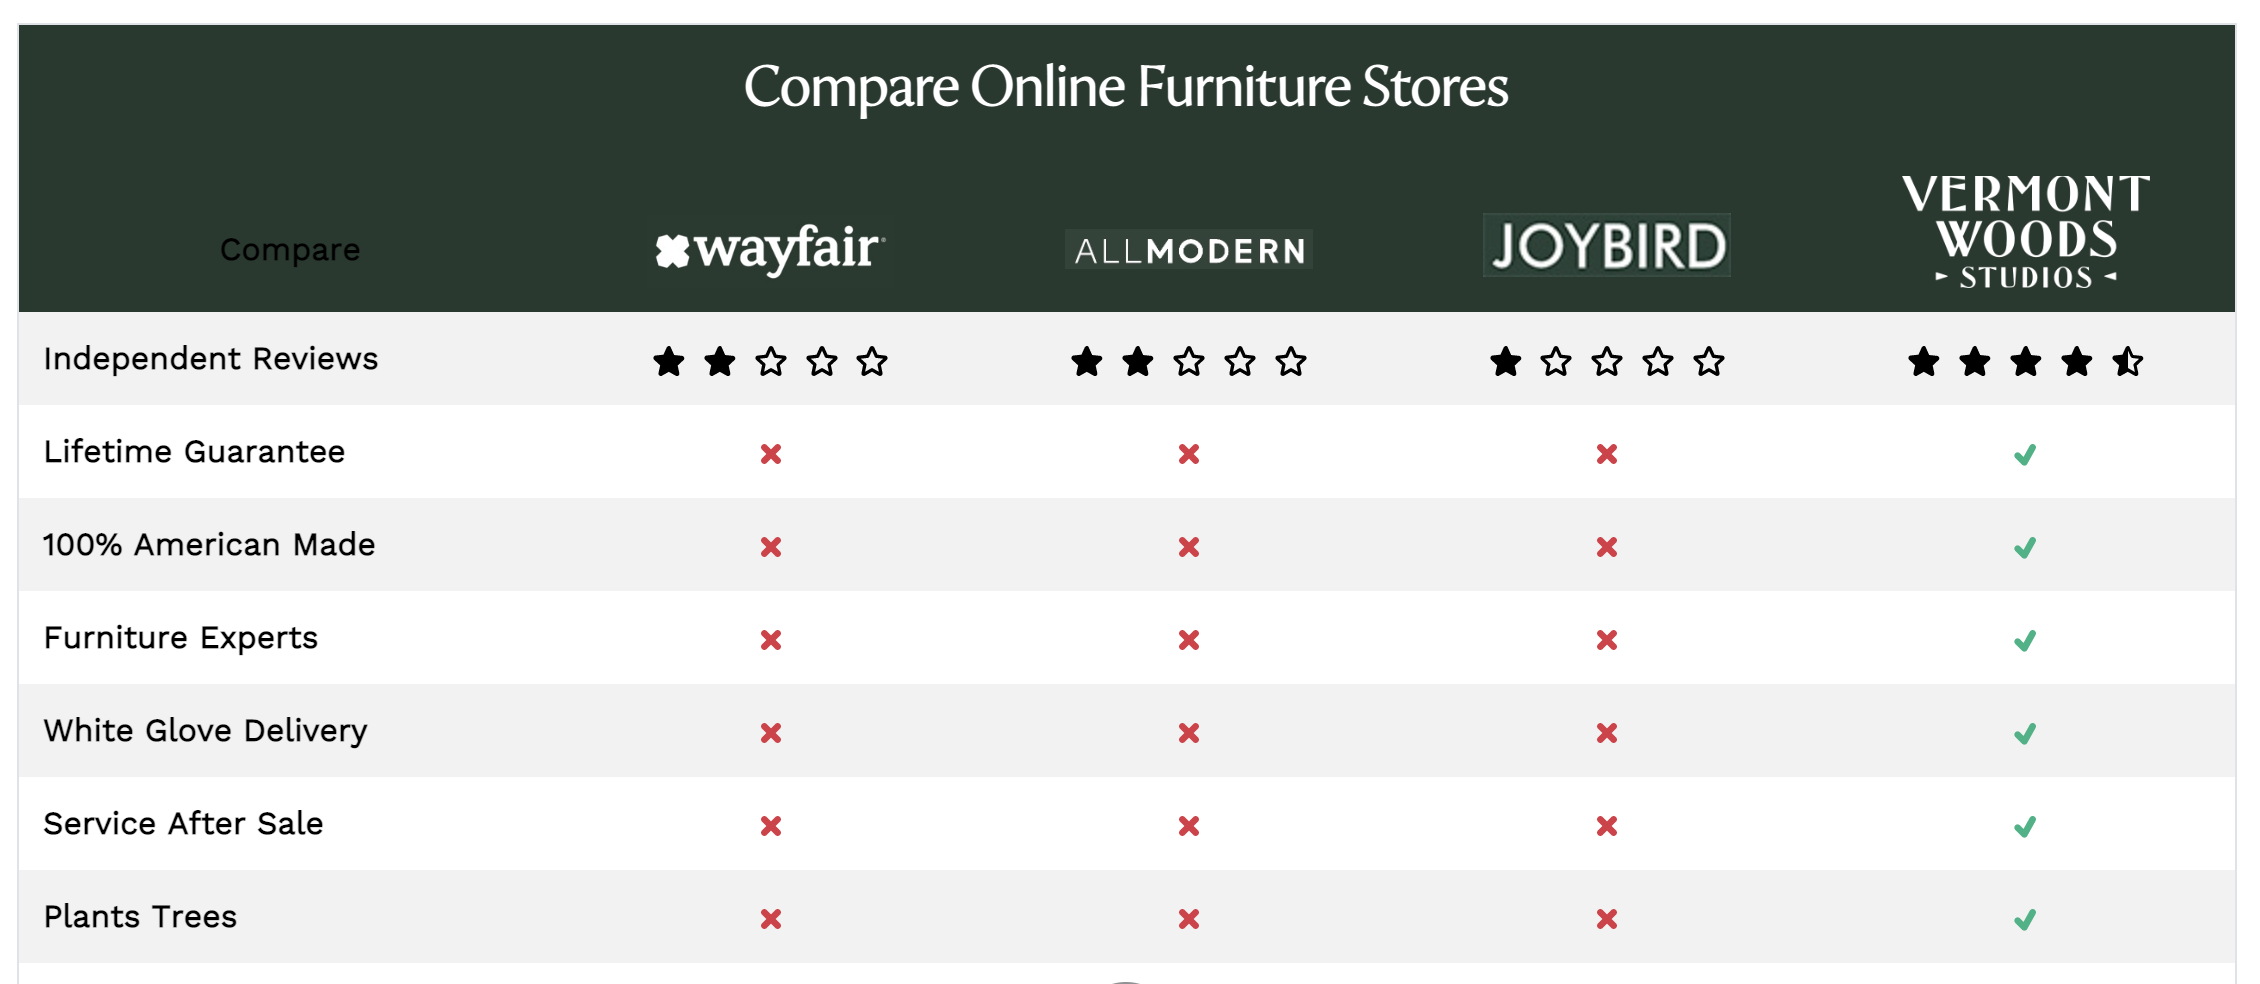 Compare Copeland Furniture for the Best Price and Value